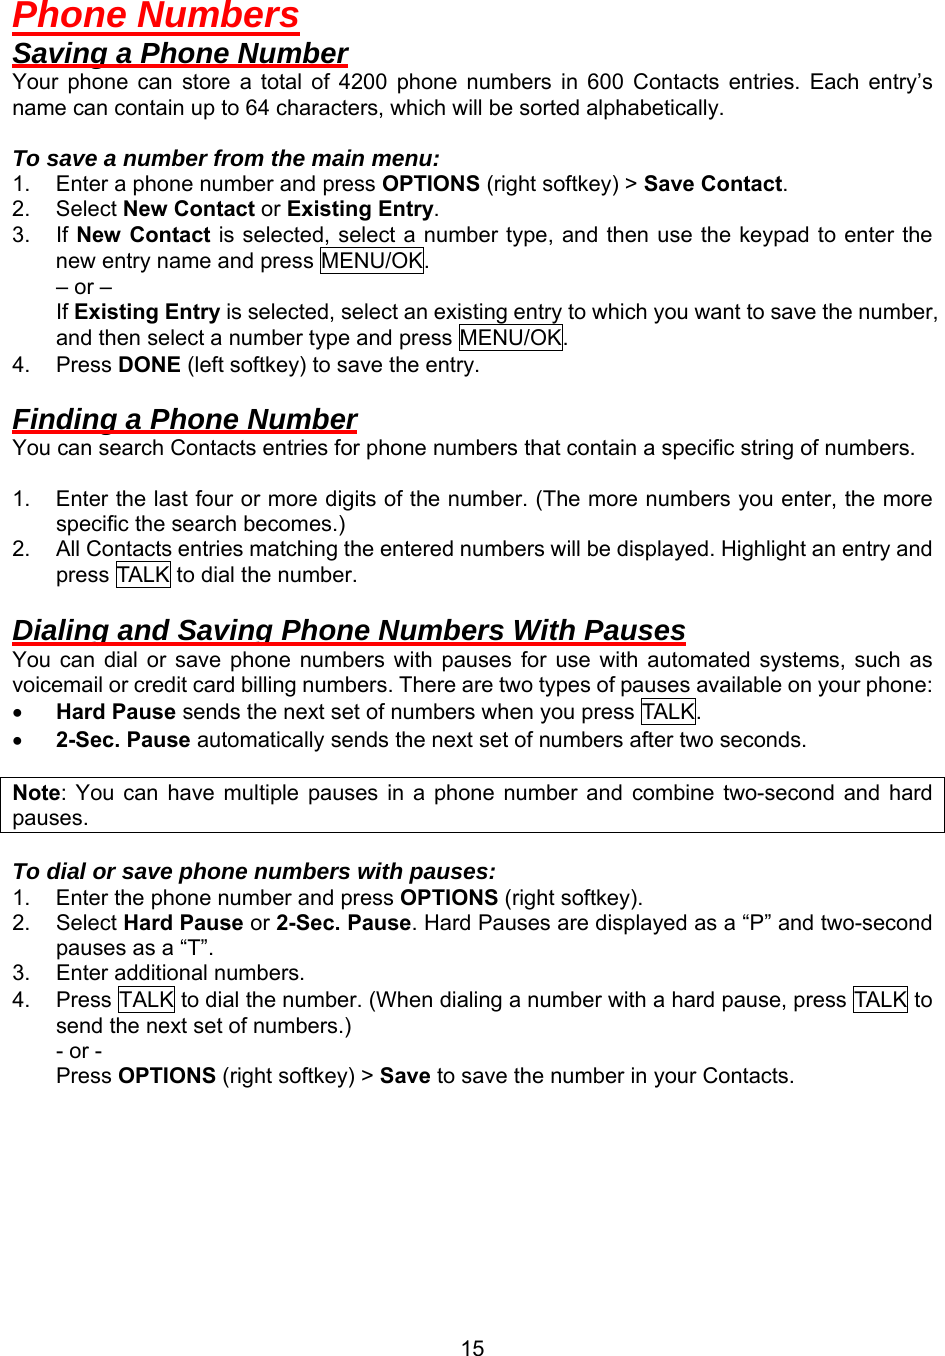  15Phone Numbers Saving a Phone Number Your phone can store a total of 4200 phone numbers in 600 Contacts entries. Each entry’s name can contain up to 64 characters, which will be sorted alphabetically.  To save a number from the main menu: 1.  Enter a phone number and press OPTIONS (right softkey) &gt; Save Contact. 2. Select New Contact or Existing Entry.  3. If New Contact is selected, select a number type, and then use the keypad to enter the new entry name and press MENU/OK.     – or –     If Existing Entry is selected, select an existing entry to which you want to save the number, and then select a number type and press MENU/OK. 4. Press DONE (left softkey) to save the entry.  Finding a Phone Number You can search Contacts entries for phone numbers that contain a specific string of numbers.  1.  Enter the last four or more digits of the number. (The more numbers you enter, the more specific the search becomes.) 2.  All Contacts entries matching the entered numbers will be displayed. Highlight an entry and press TALK to dial the number.  Dialing and Saving Phone Numbers With Pauses You can dial or save phone numbers with pauses for use with automated systems, such as voicemail or credit card billing numbers. There are two types of pauses available on your phone: •  Hard Pause sends the next set of numbers when you press TALK .  •  2-Sec. Pause automatically sends the next set of numbers after two seconds.    Note: You can have multiple pauses in a phone number and combine two-second and hard pauses.  To dial or save phone numbers with pauses: 1.  Enter the phone number and press OPTIONS (right softkey). 2. Select Hard Pause or 2-Sec. Pause. Hard Pauses are displayed as a “P” and two-second pauses as a “T”. 3.  Enter additional numbers. 4.  Press TALK to dial the number. (When dialing a number with a hard pause, press TALK to send the next set of numbers.) - or - Press OPTIONS (right softkey) &gt; Save to save the number in your Contacts.  